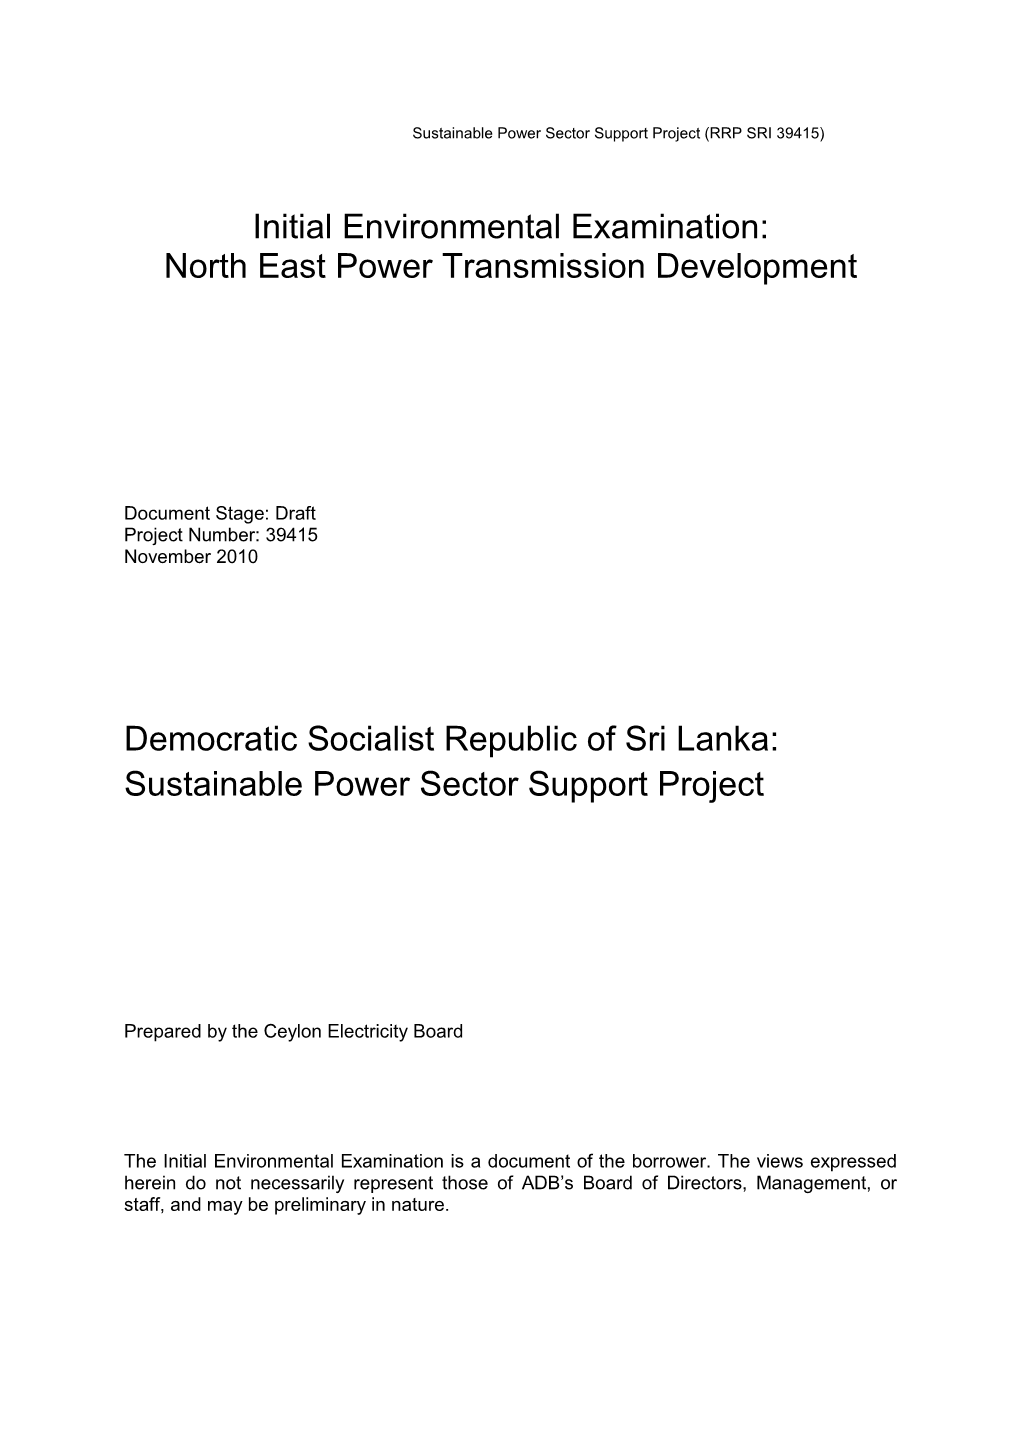 Sri Lanka: Sustainable Power Sector Support Project